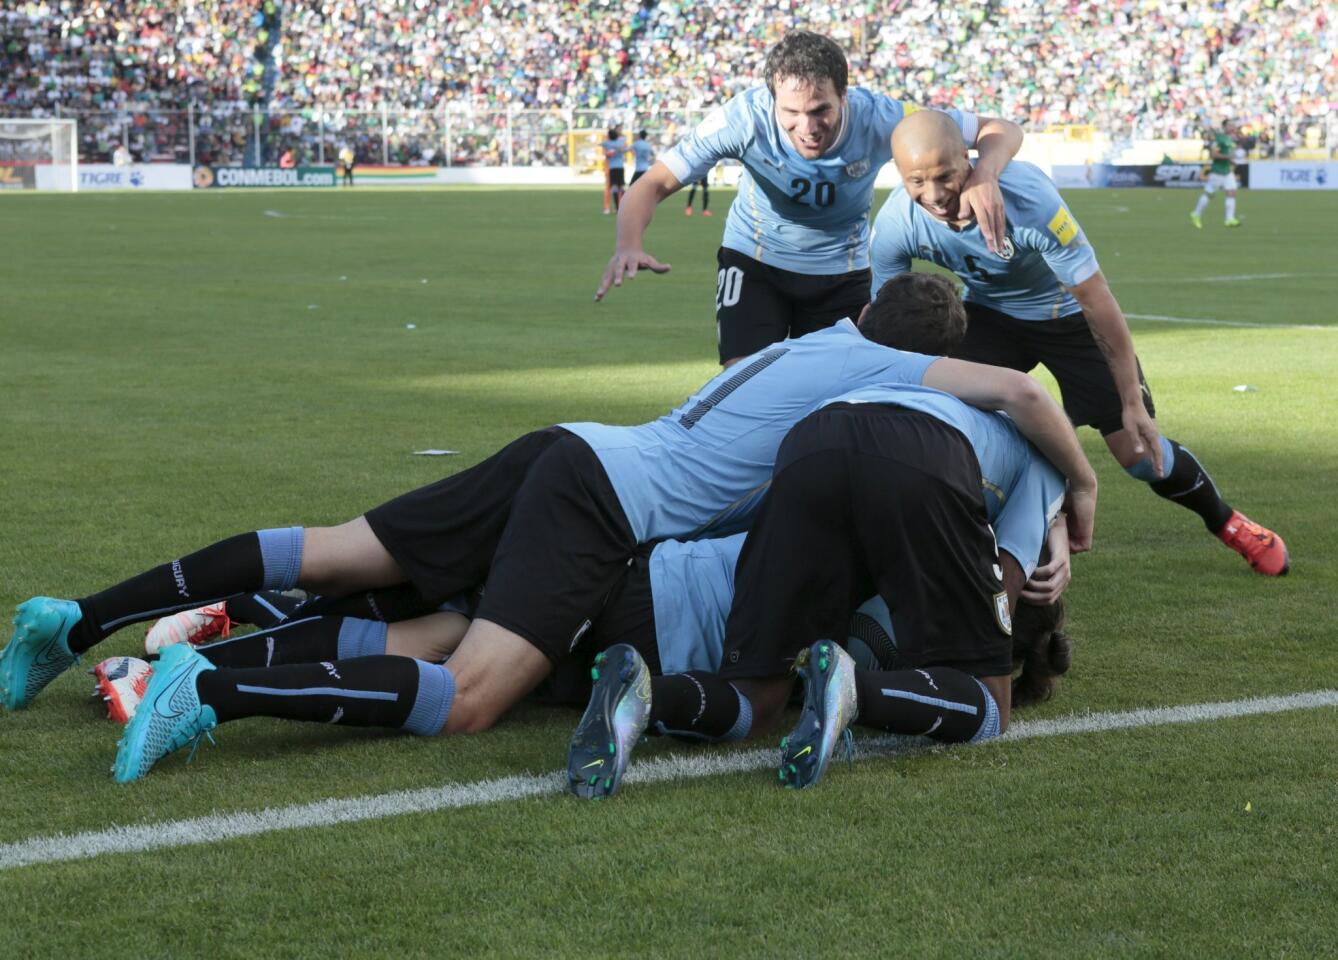 Players of Uruguay celebrate their team's second goal after teammate Diego Godin scored against Bolivia during their 2018 World Cup qualifying soccer match in La Paz